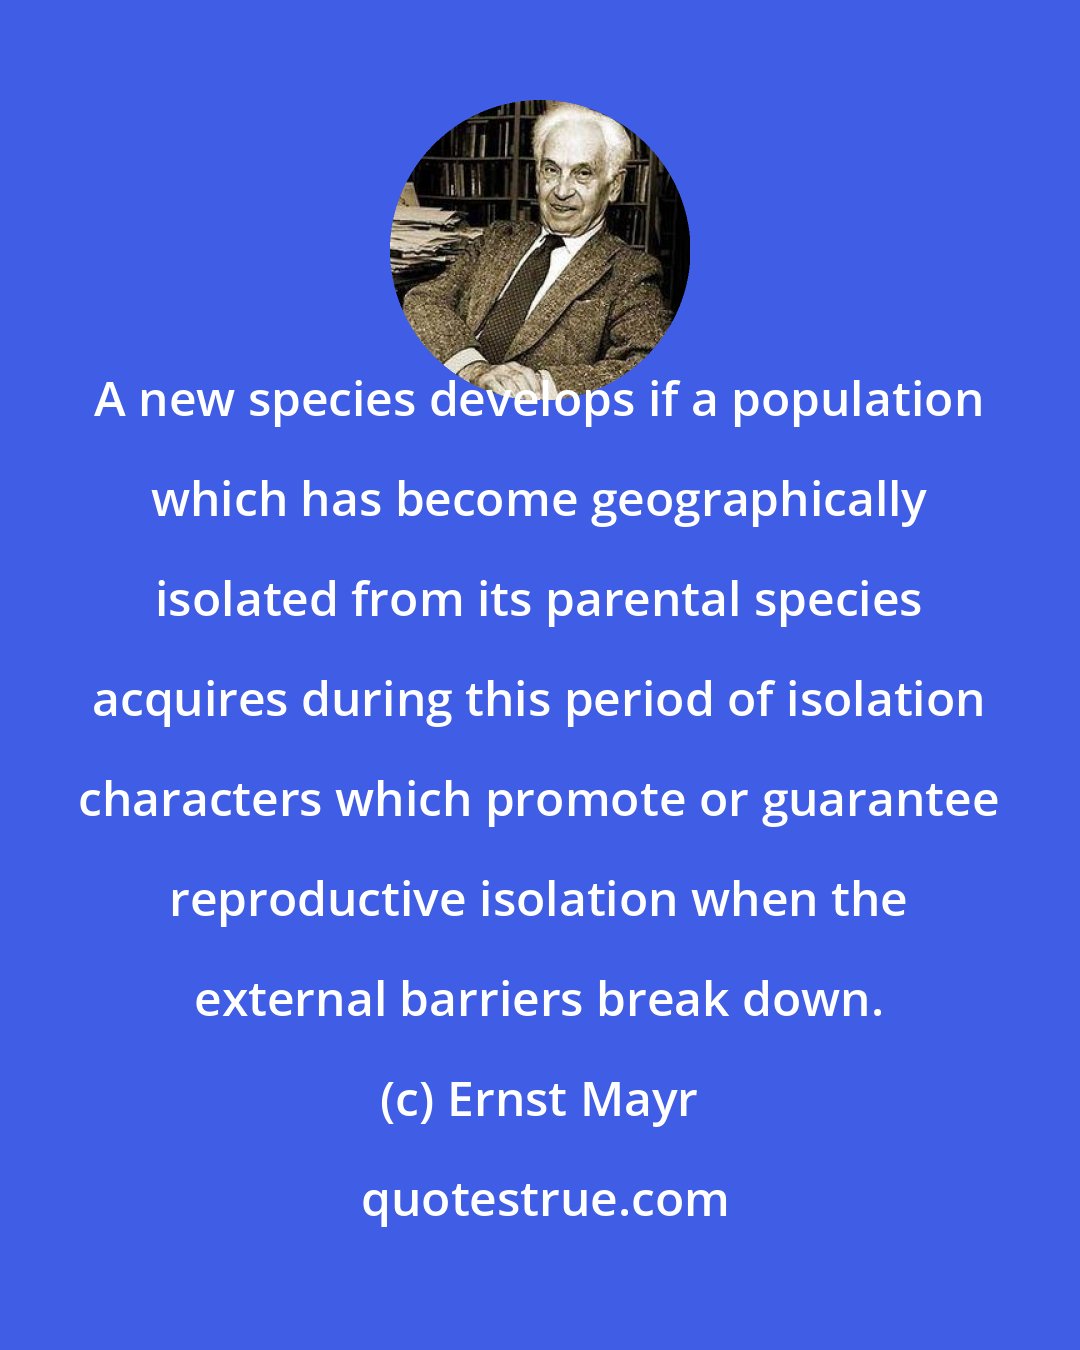 Ernst Mayr: A new species develops if a population which has become geographically isolated from its parental species acquires during this period of isolation characters which promote or guarantee reproductive isolation when the external barriers break down.